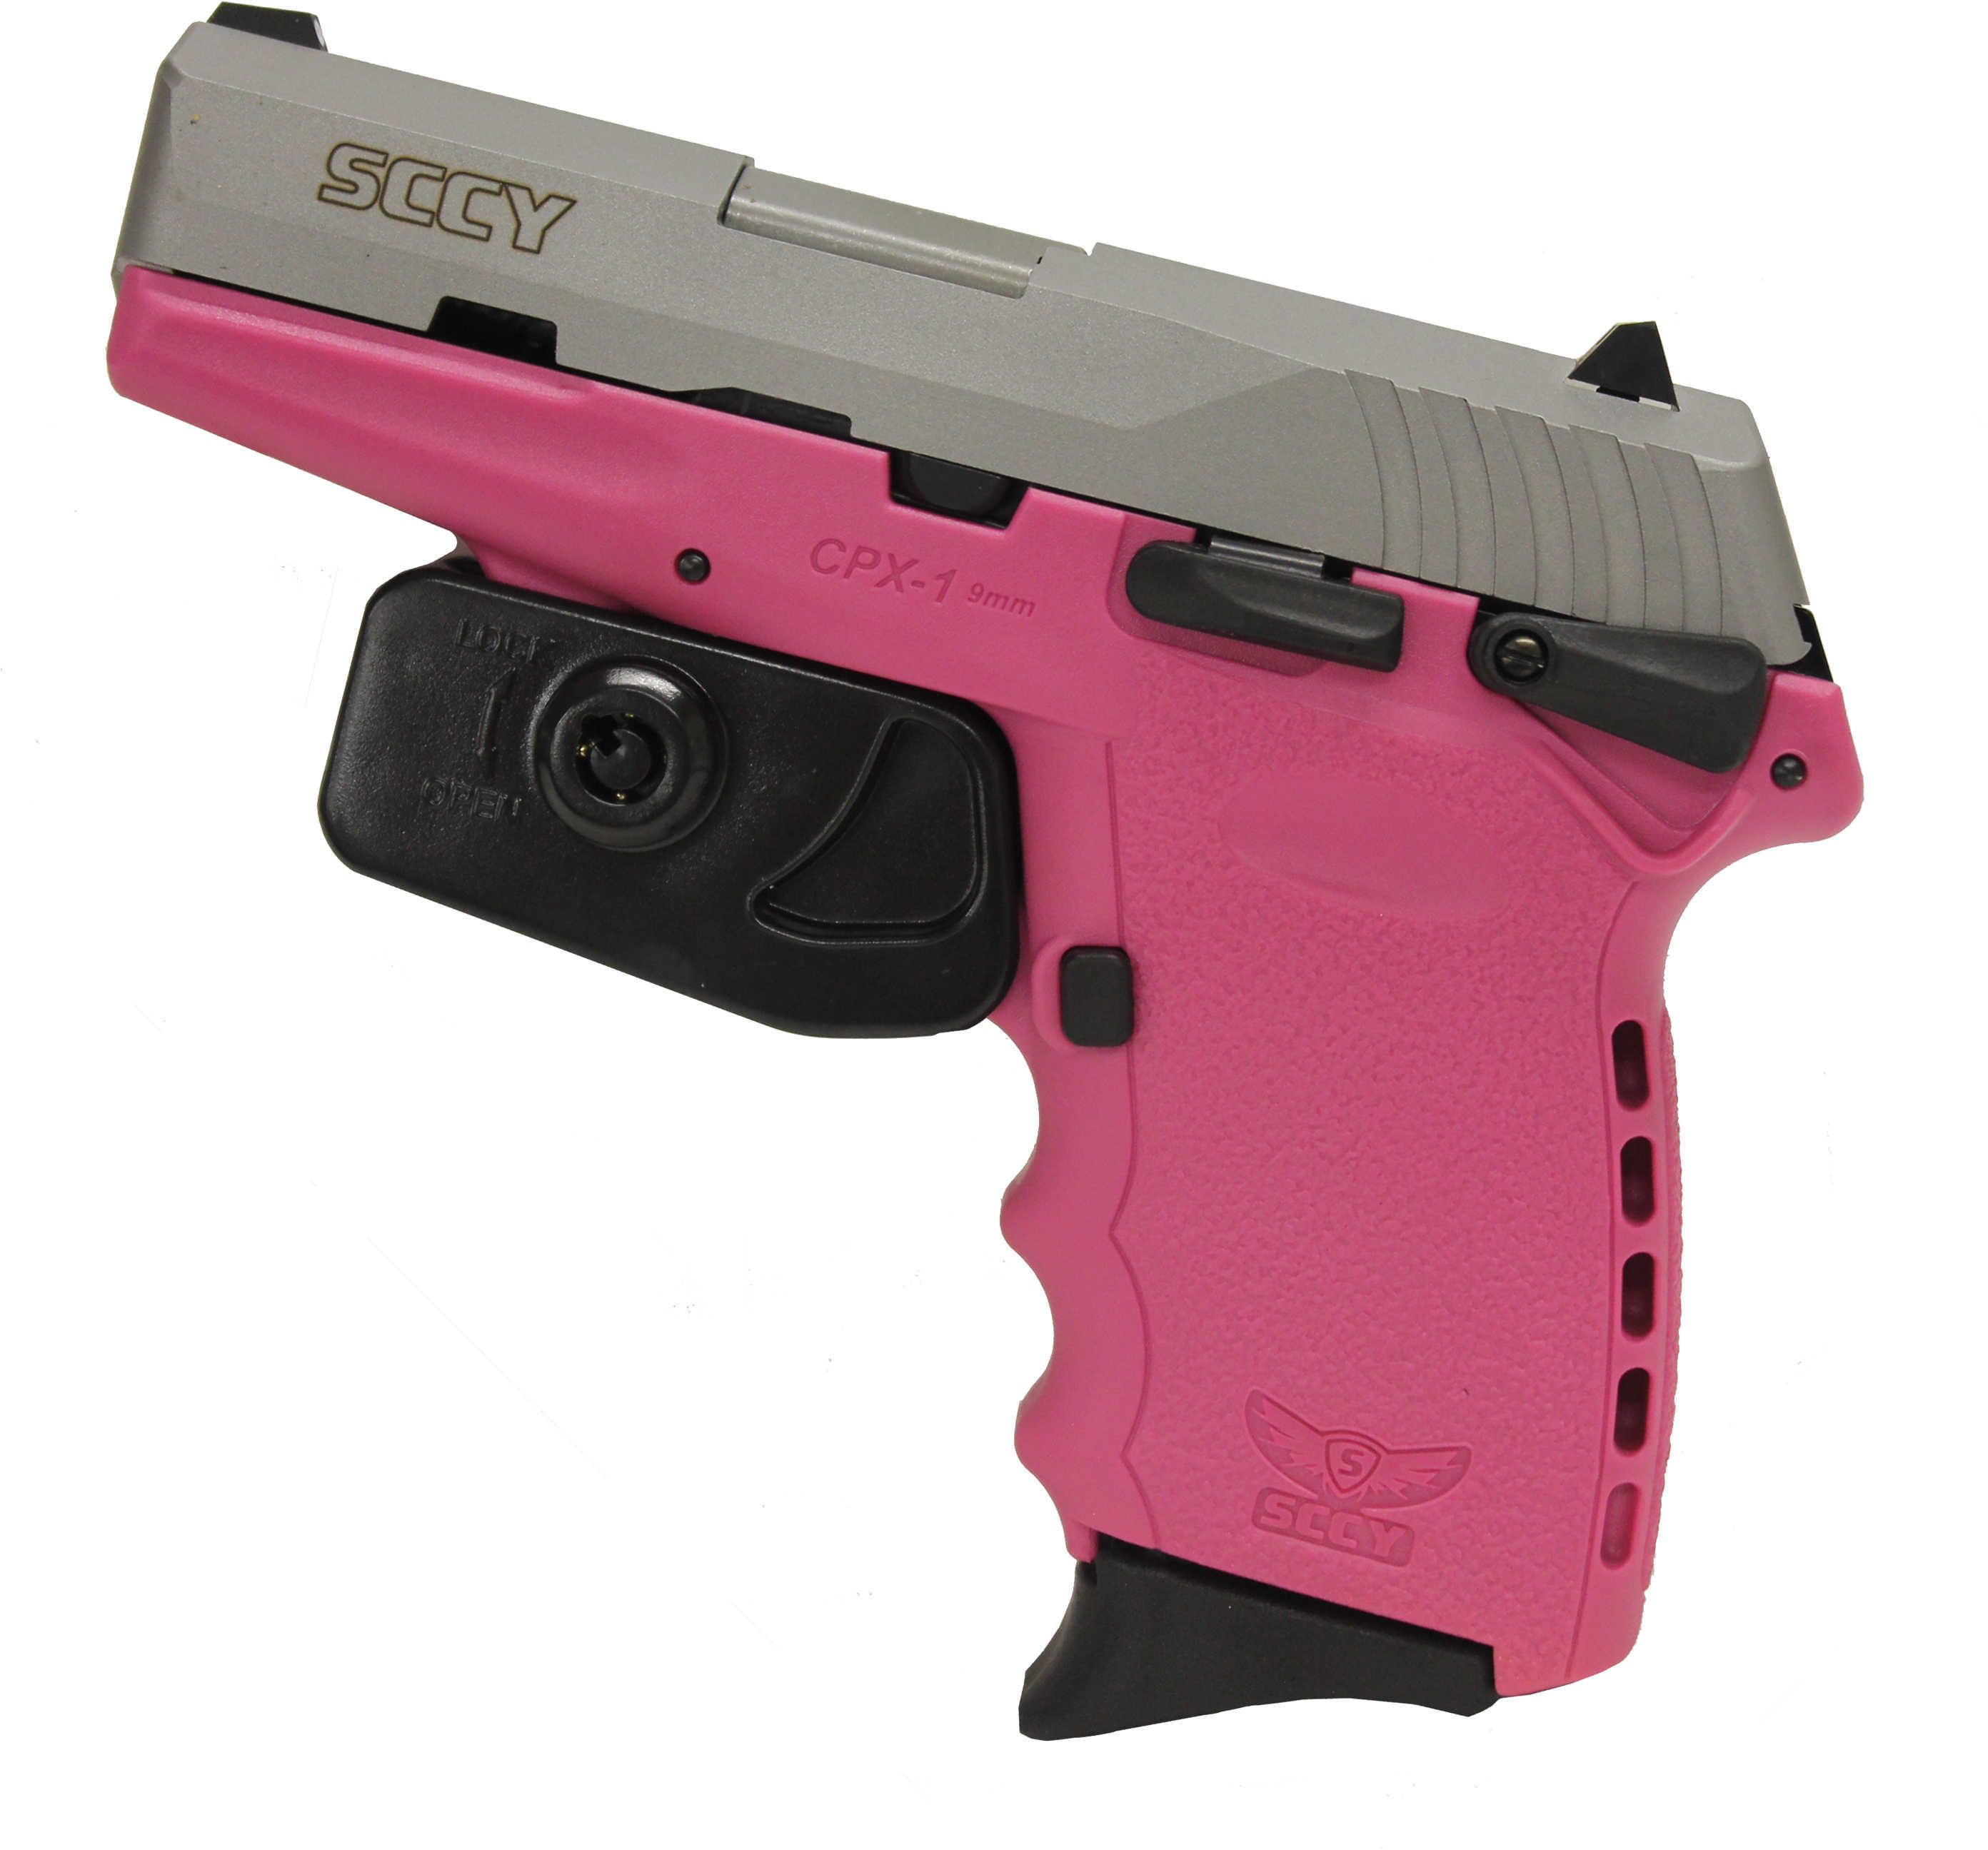 SCCY CPX-2 9mm Luger 3.1" Barrel 10 Round 2 Magazines Double Action Compact Polymer Pink Semi Automatic Pistol TTPK